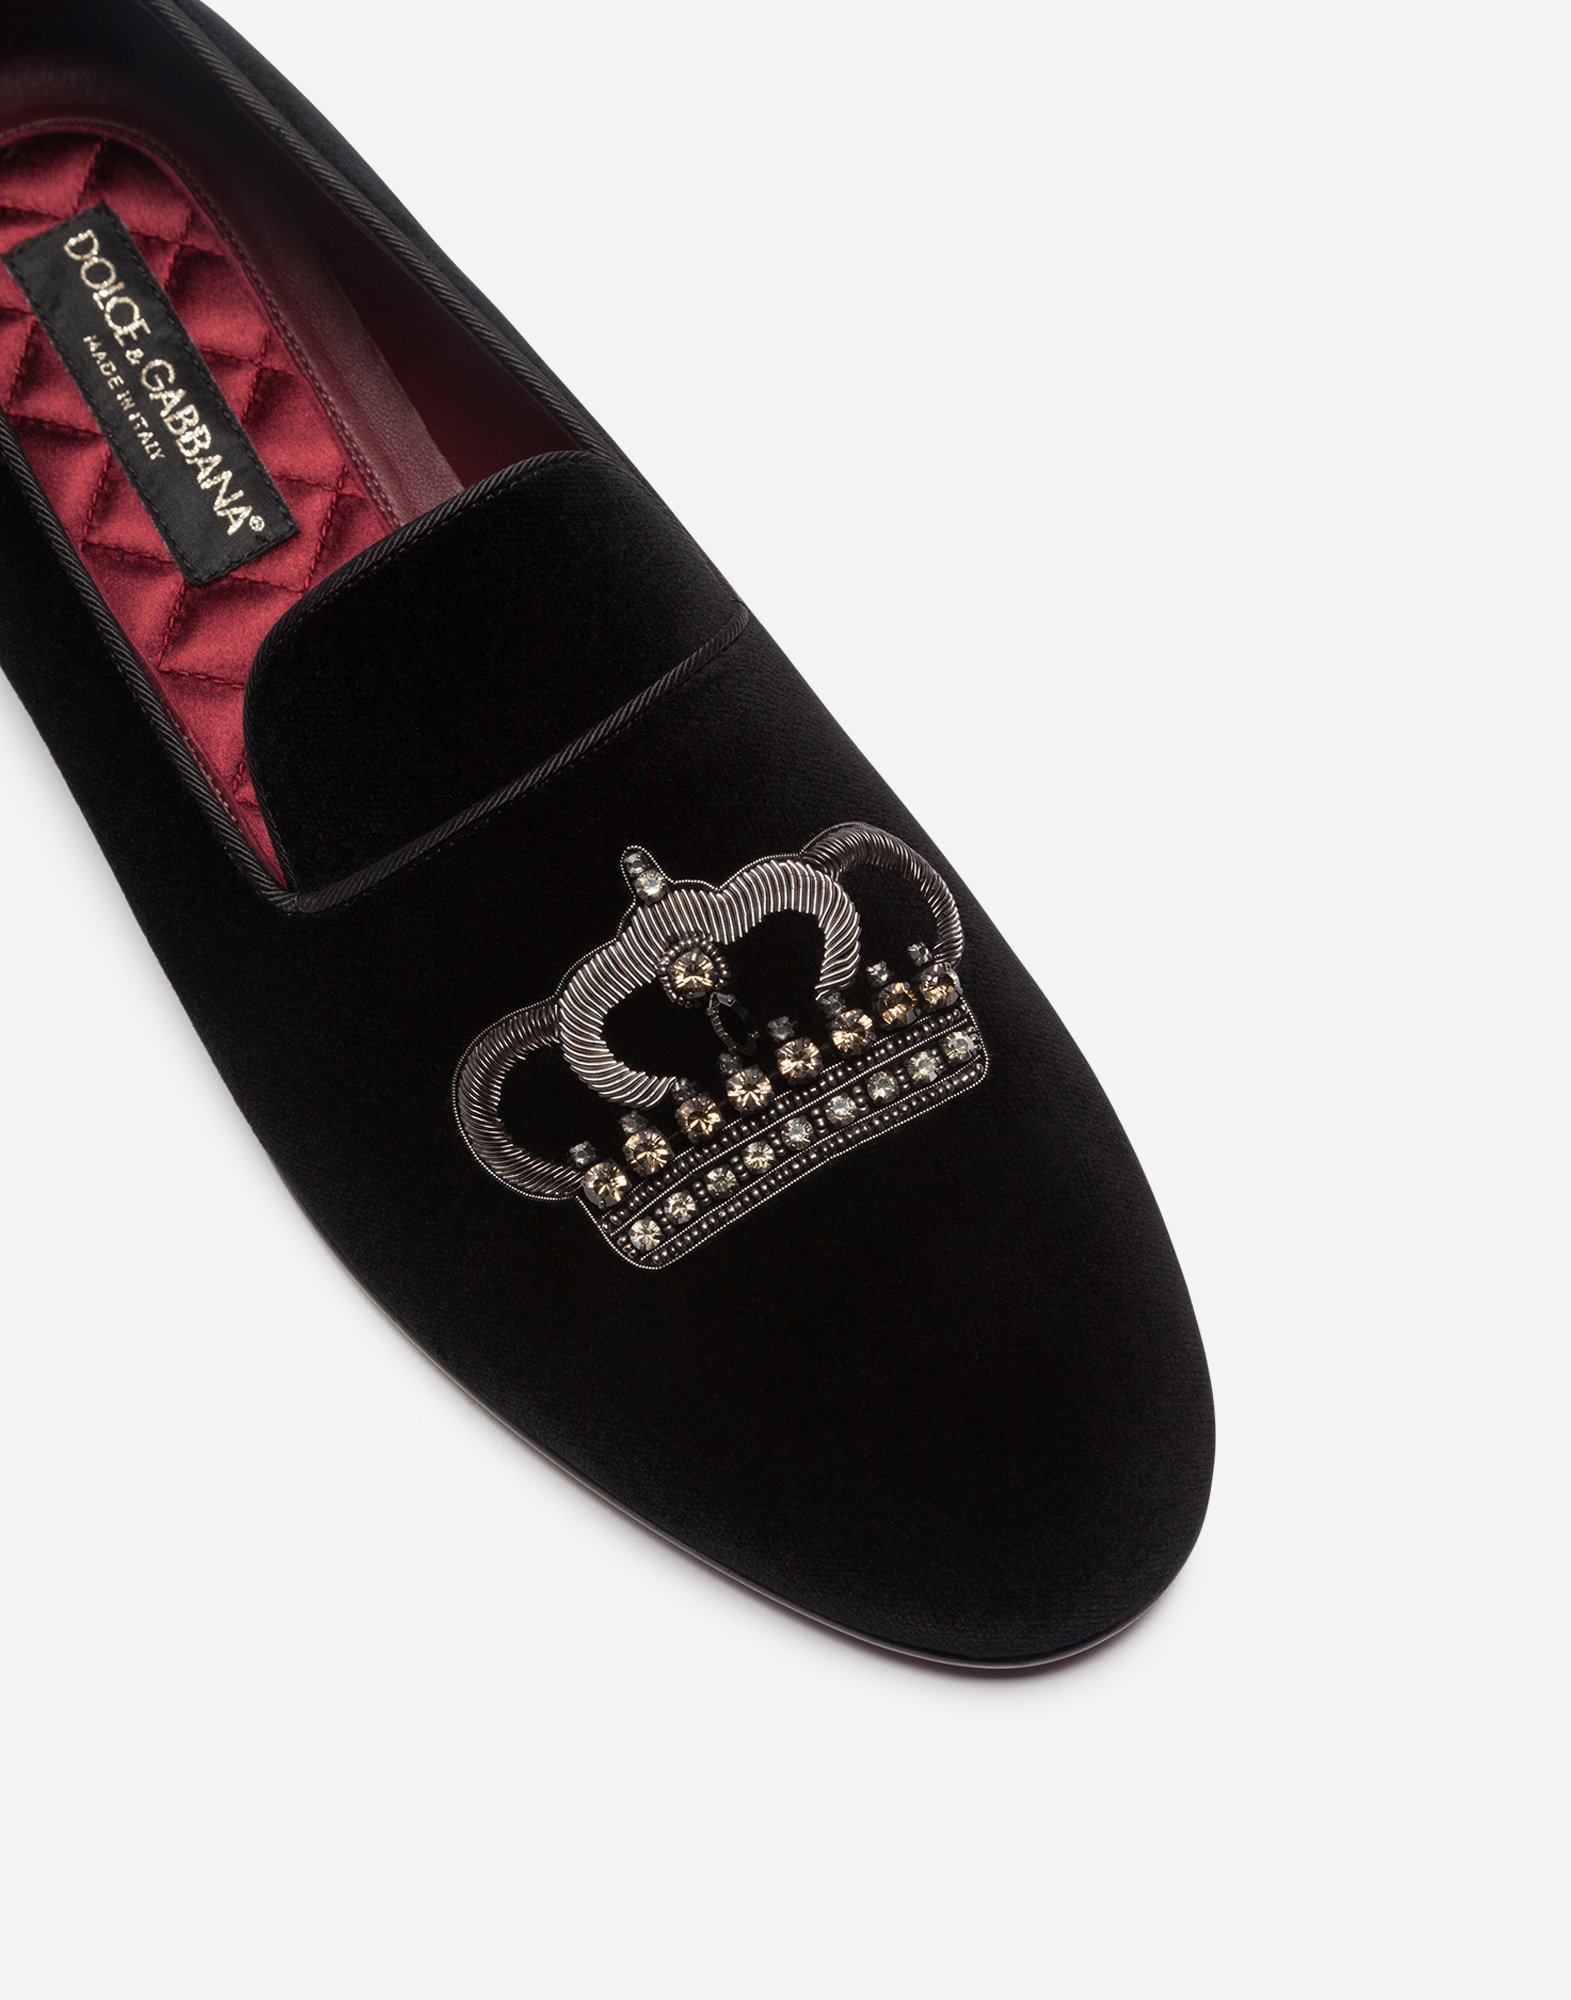 velvet slippers with embroidery